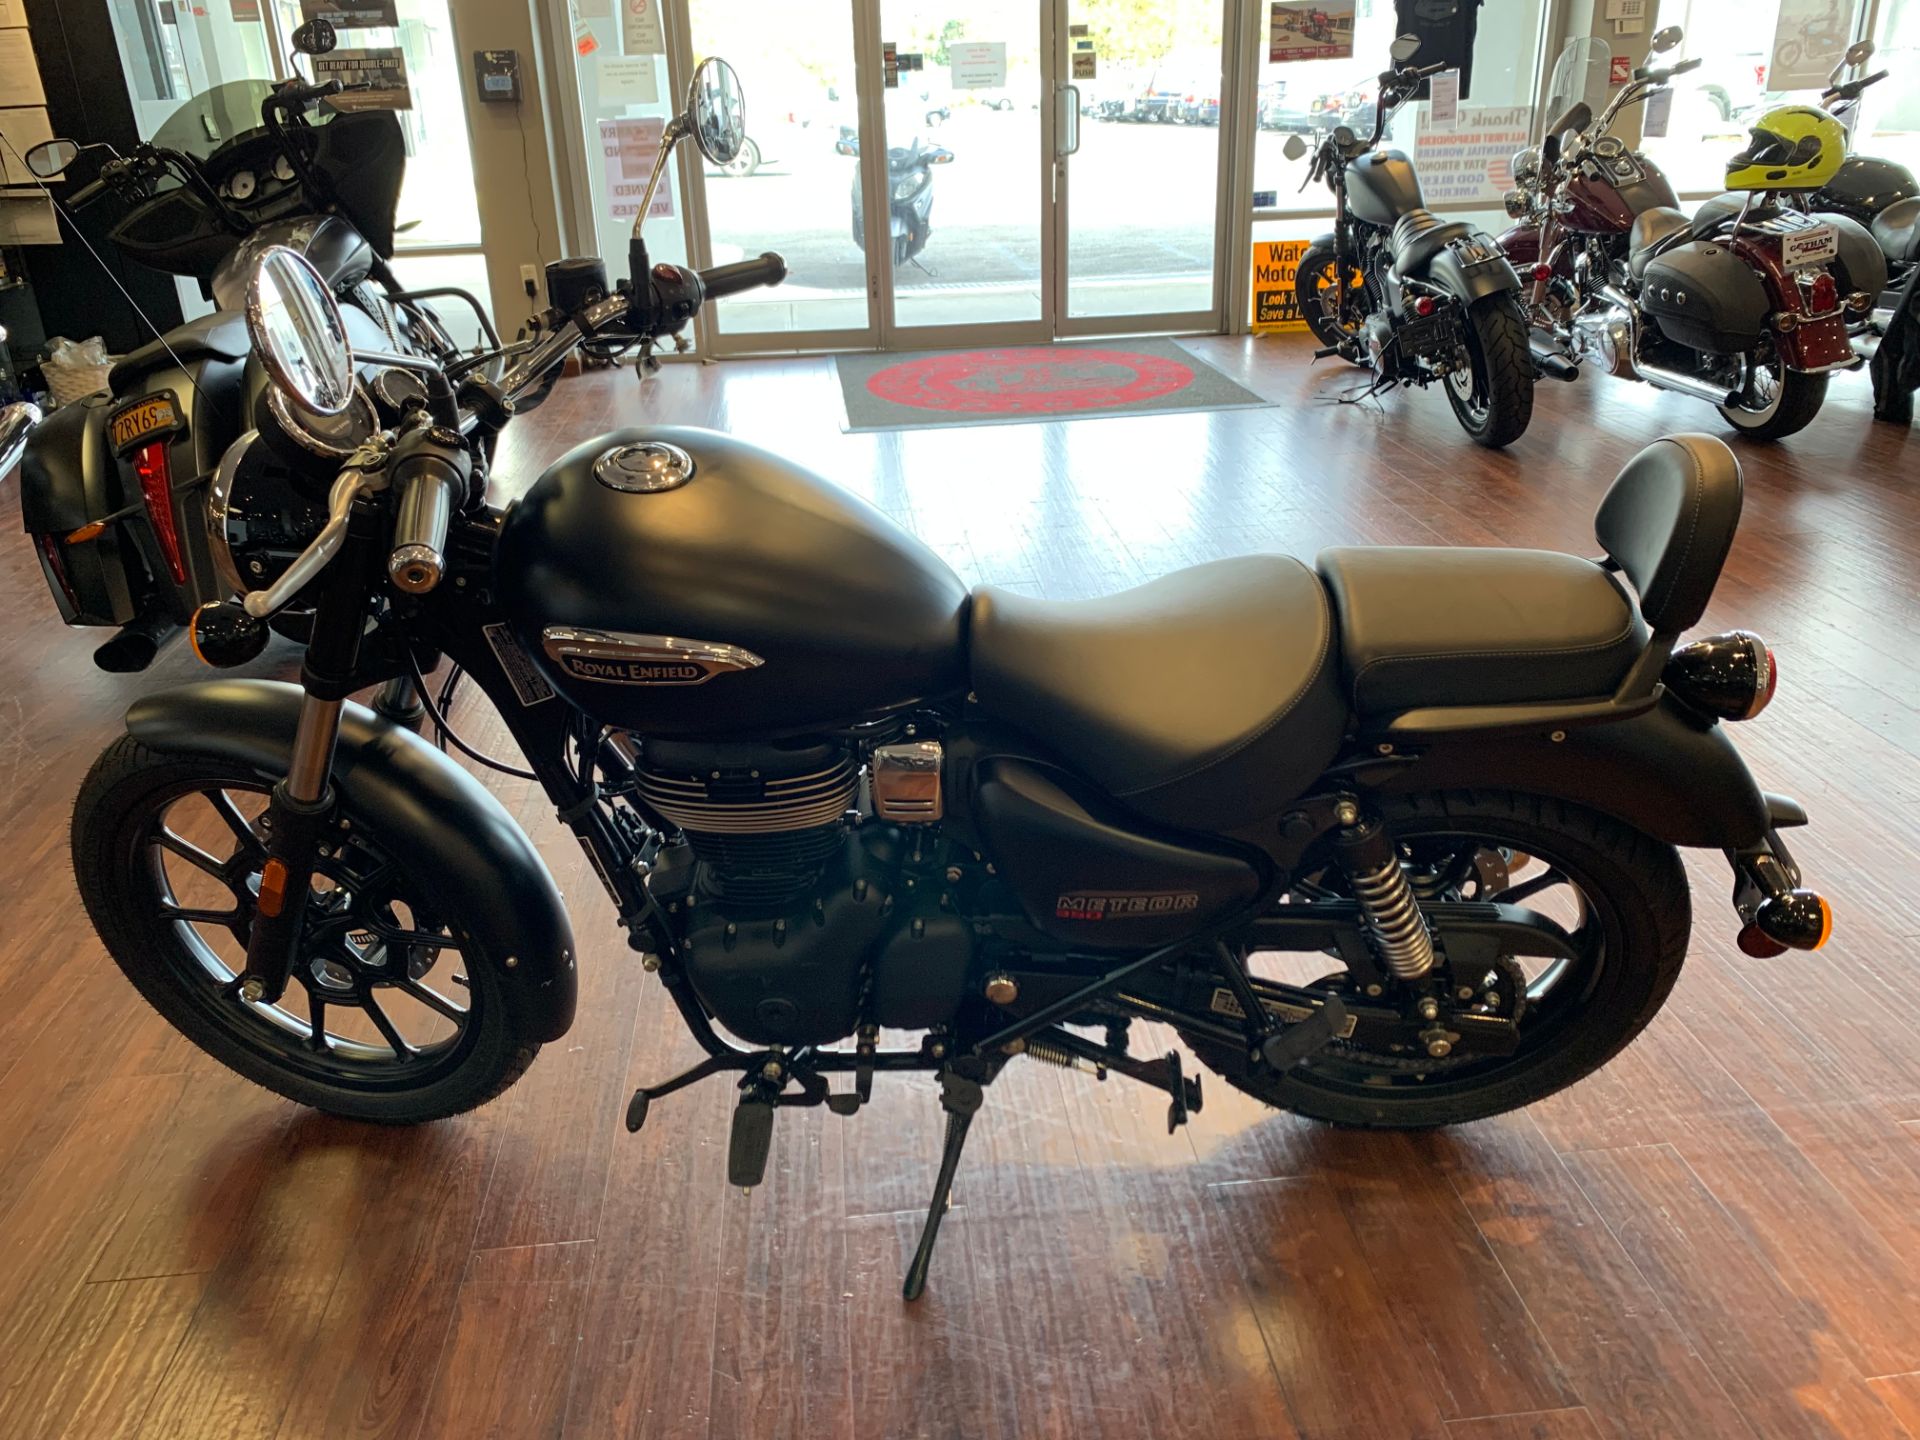 2022 Royal Enfield Meteor 350 in Staten Island, New York - Photo 3